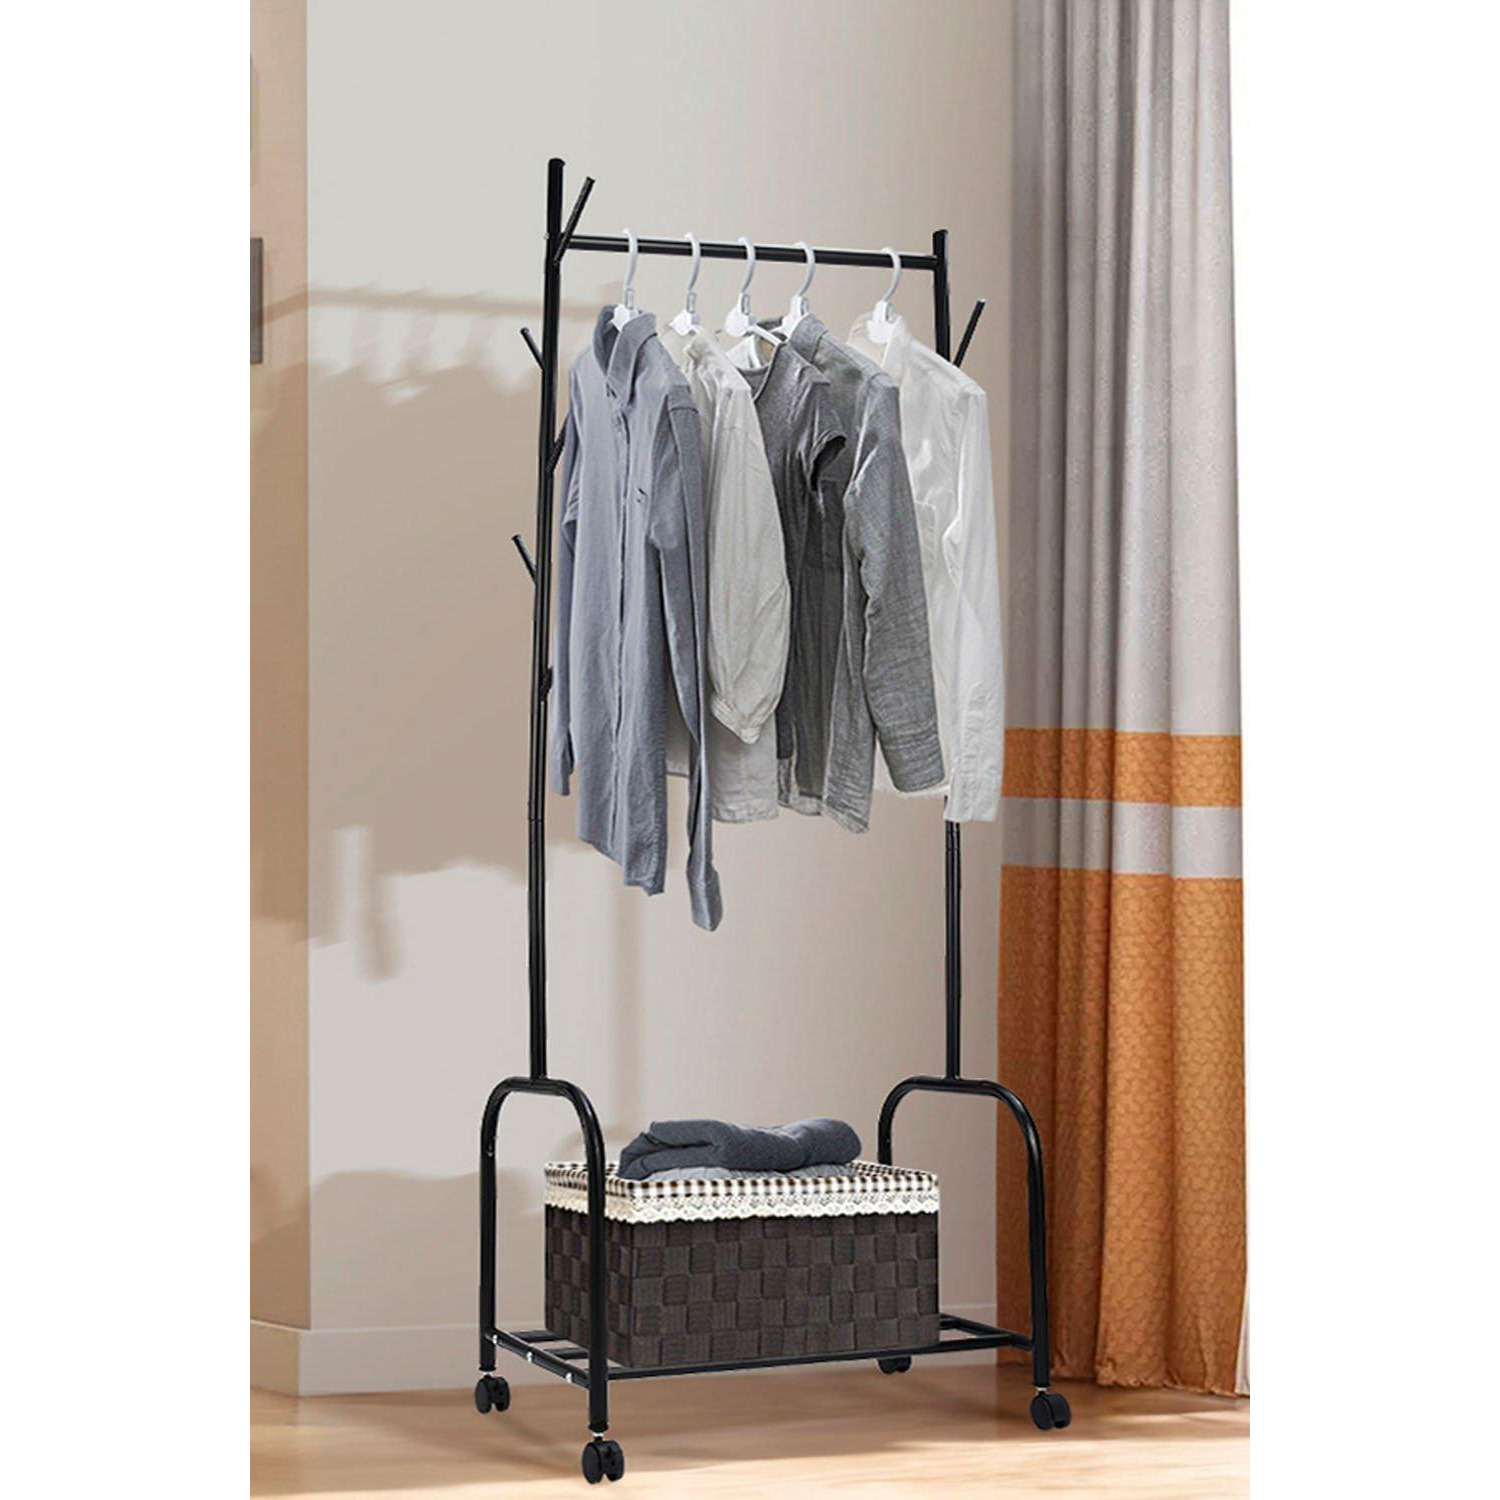 Single Rail Clothes Rail Hanging Display Stand - image 1